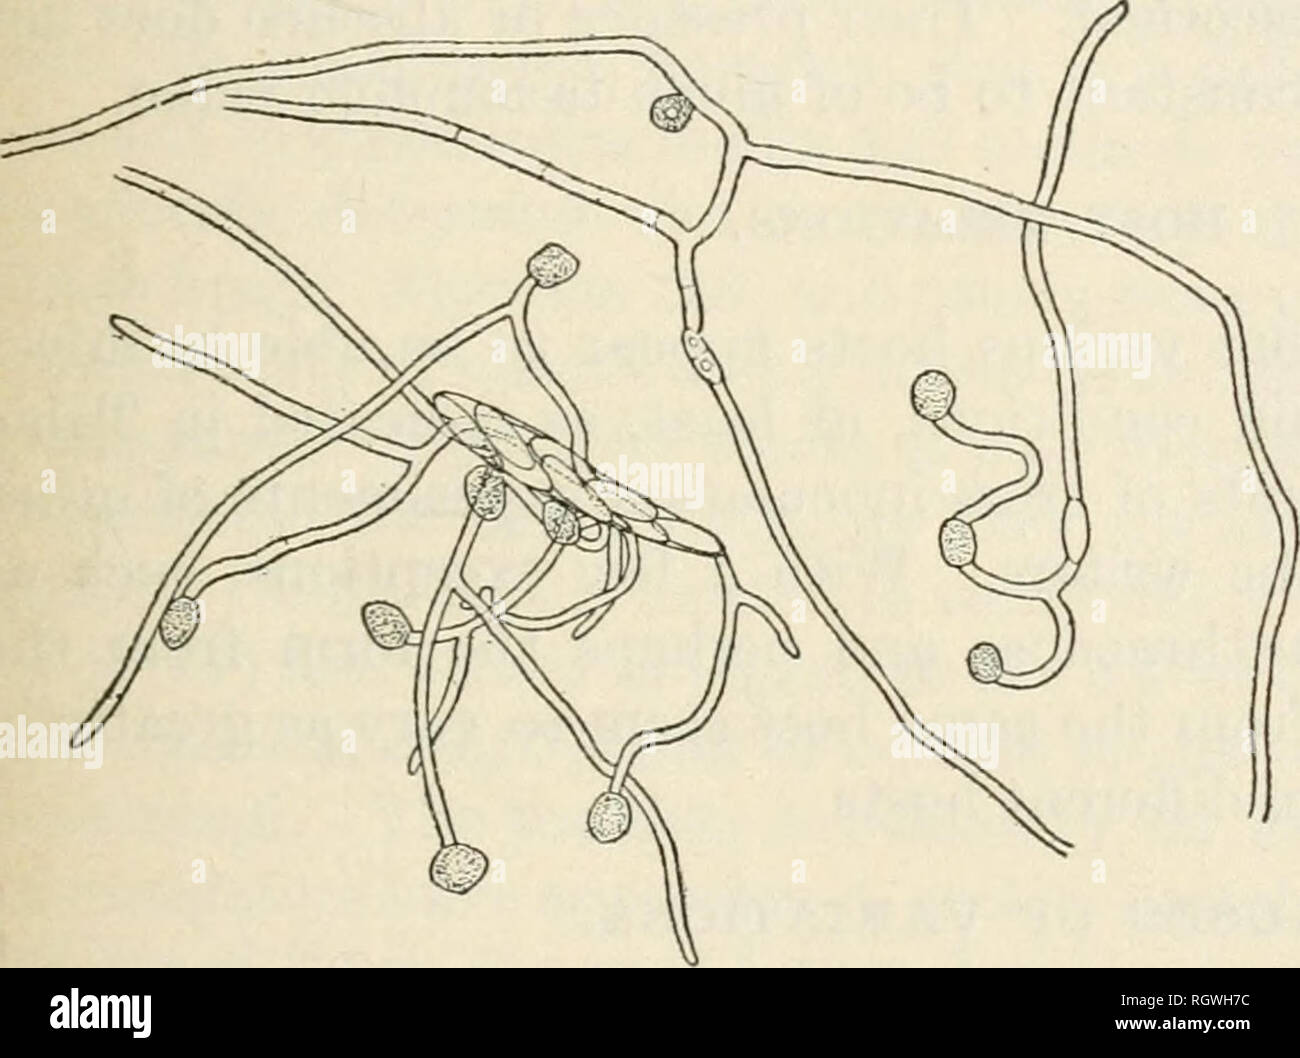 . Bulletin. 1901-13. Agriculture; Agriculture. Fig. 2.—Germinating conidia of Glomerella cingw- lata from a culture from pear, showing the for- mation of chlamydospores after 24 hours in drop cultures of sterile water. PERITHECIA. Perithecia have been found to vary in abundance, size, shape, arrangement, and location with reference to the surface of the me- dium. They are generally glo- bose or subglobose, though some- times elongated or pear shaped. The beak when present is usually very short, though commonly the perithecia are merely papil- late. In rare cases, however, they have been found  Stock Photo